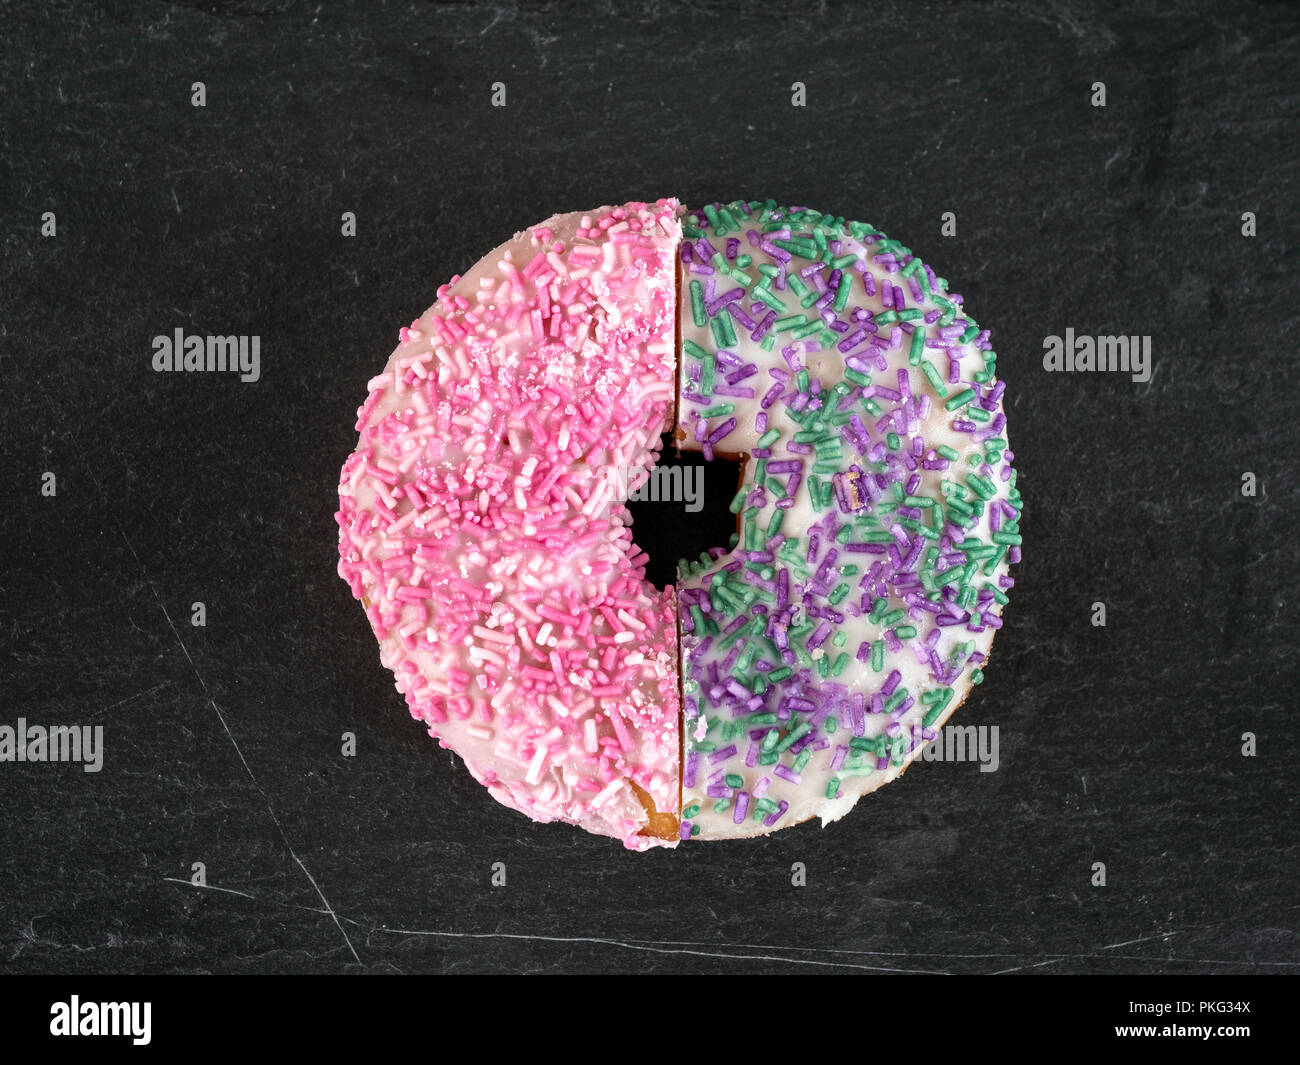 Two half donuts covered in icing and sprinkles pushed together to create a whole donut Stock Photo